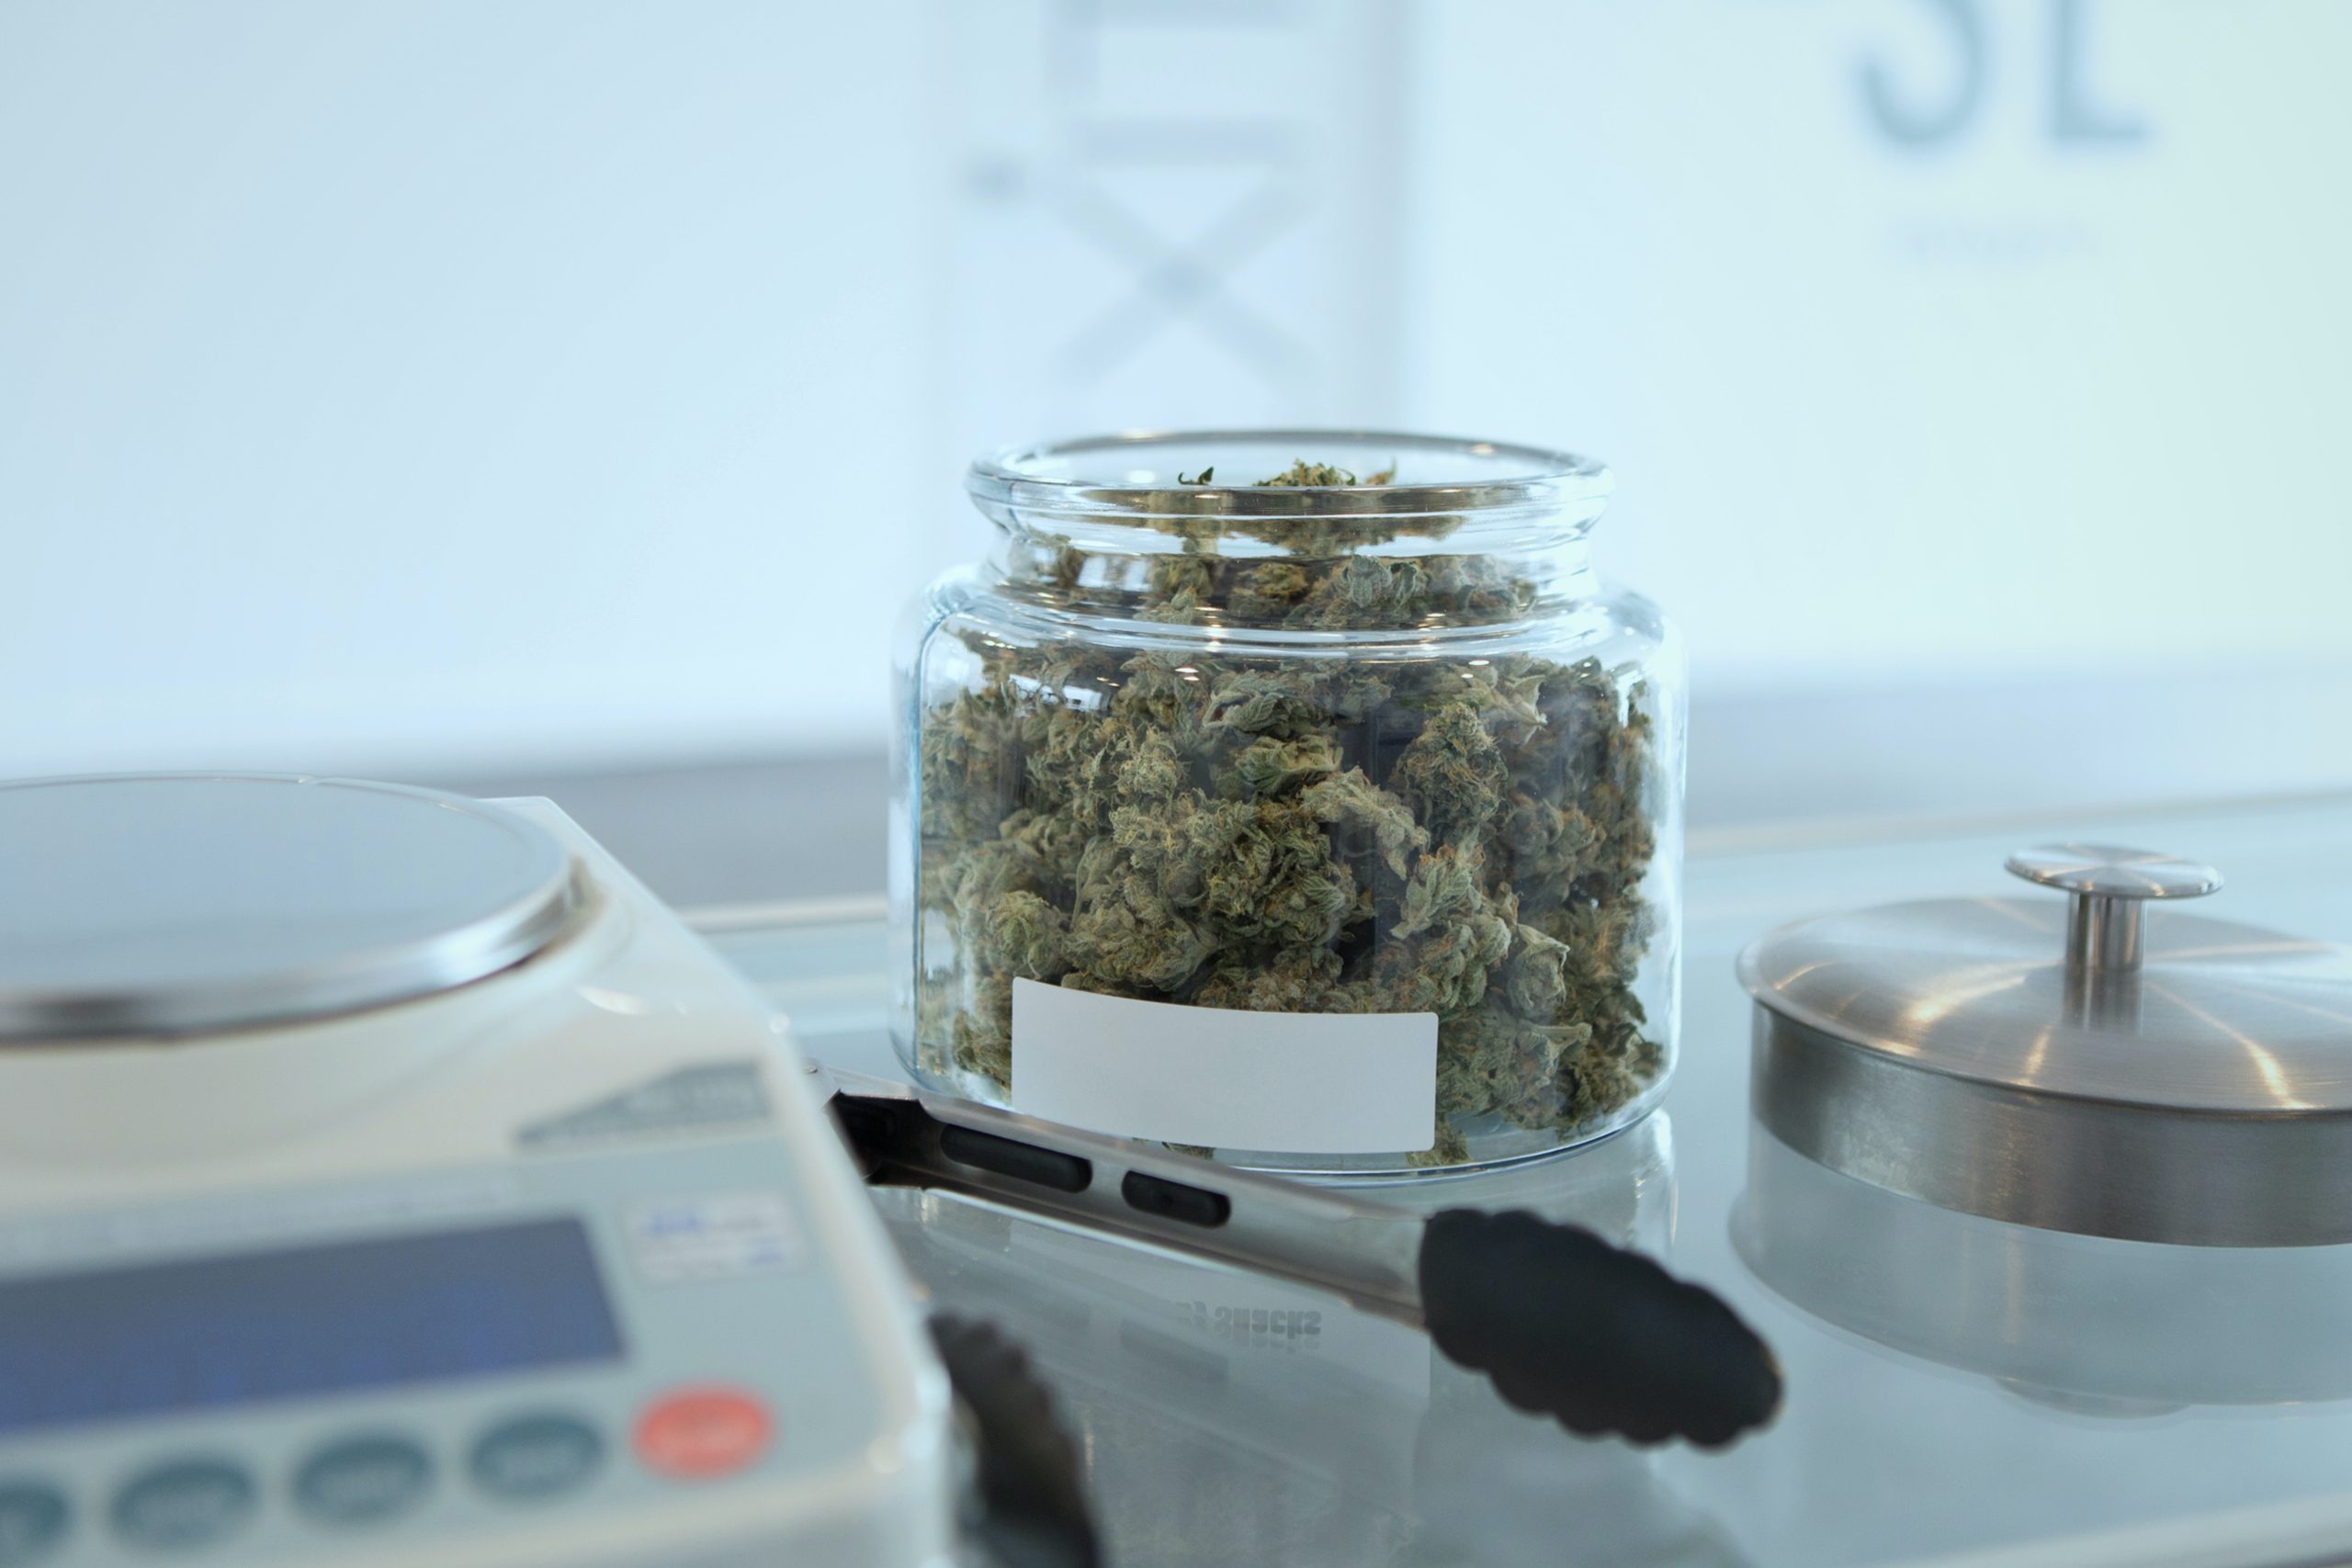 kush in a jar with scale